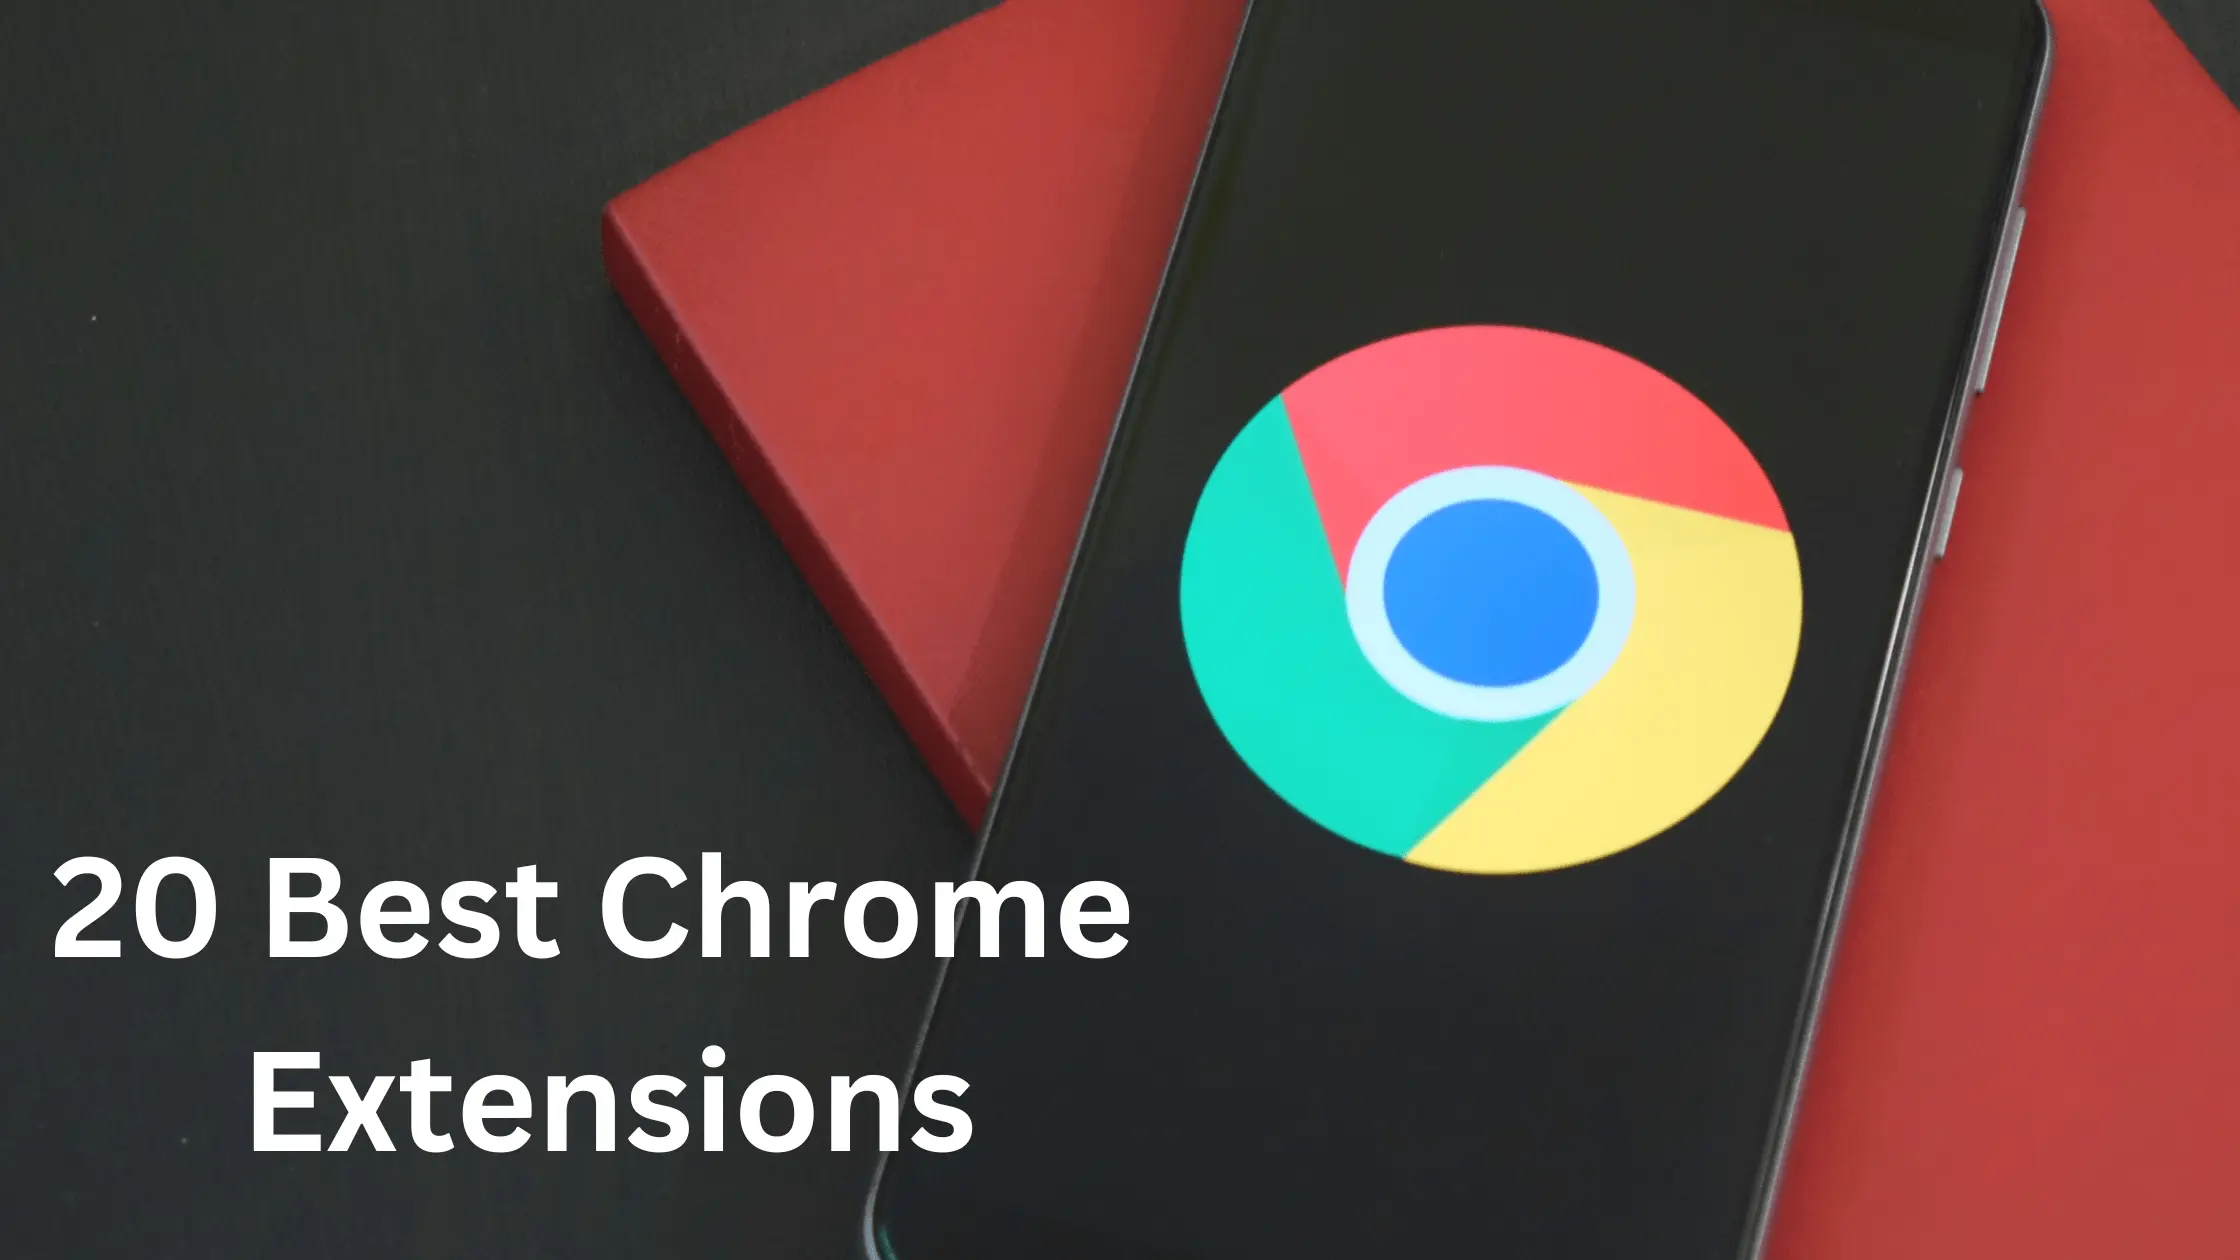 Best Chrome Extensions for Productivity